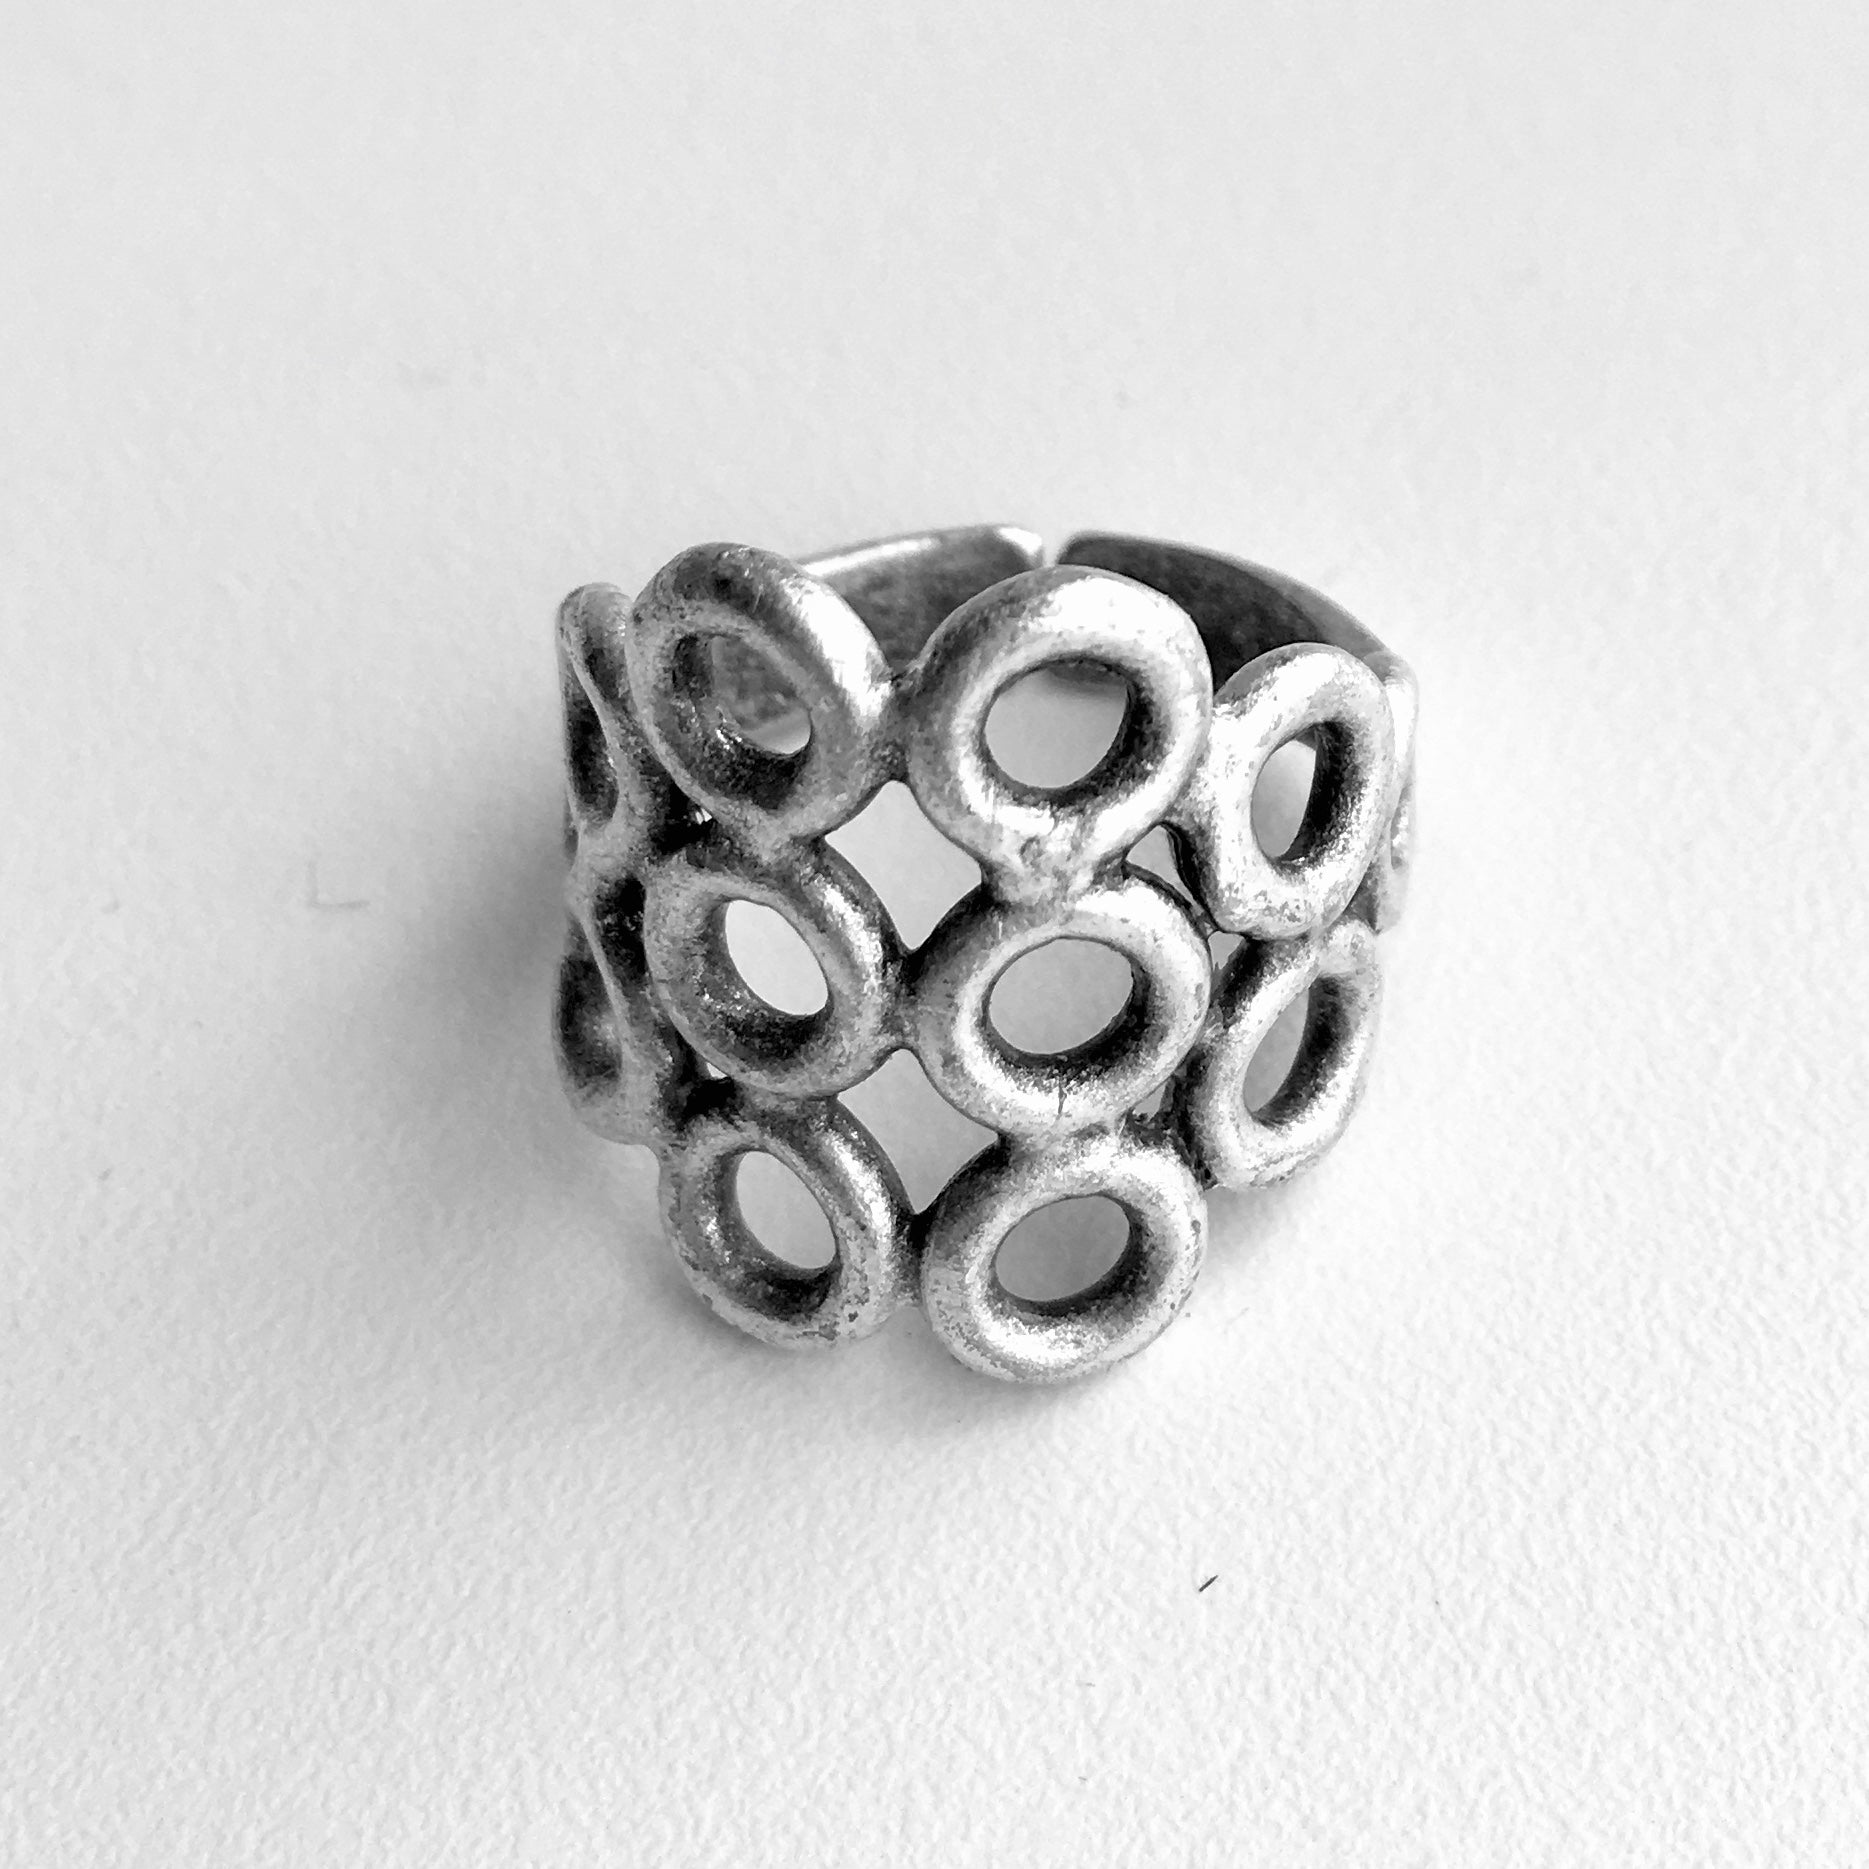 Turkish made silver colored mixed metal ring with 6 center cut out circles in rows of 3 with a row of 2 circles on either side, finishing with one circle next to the row of 2.  3/4 inch from top to bottom from the largest part of the ring, front. 